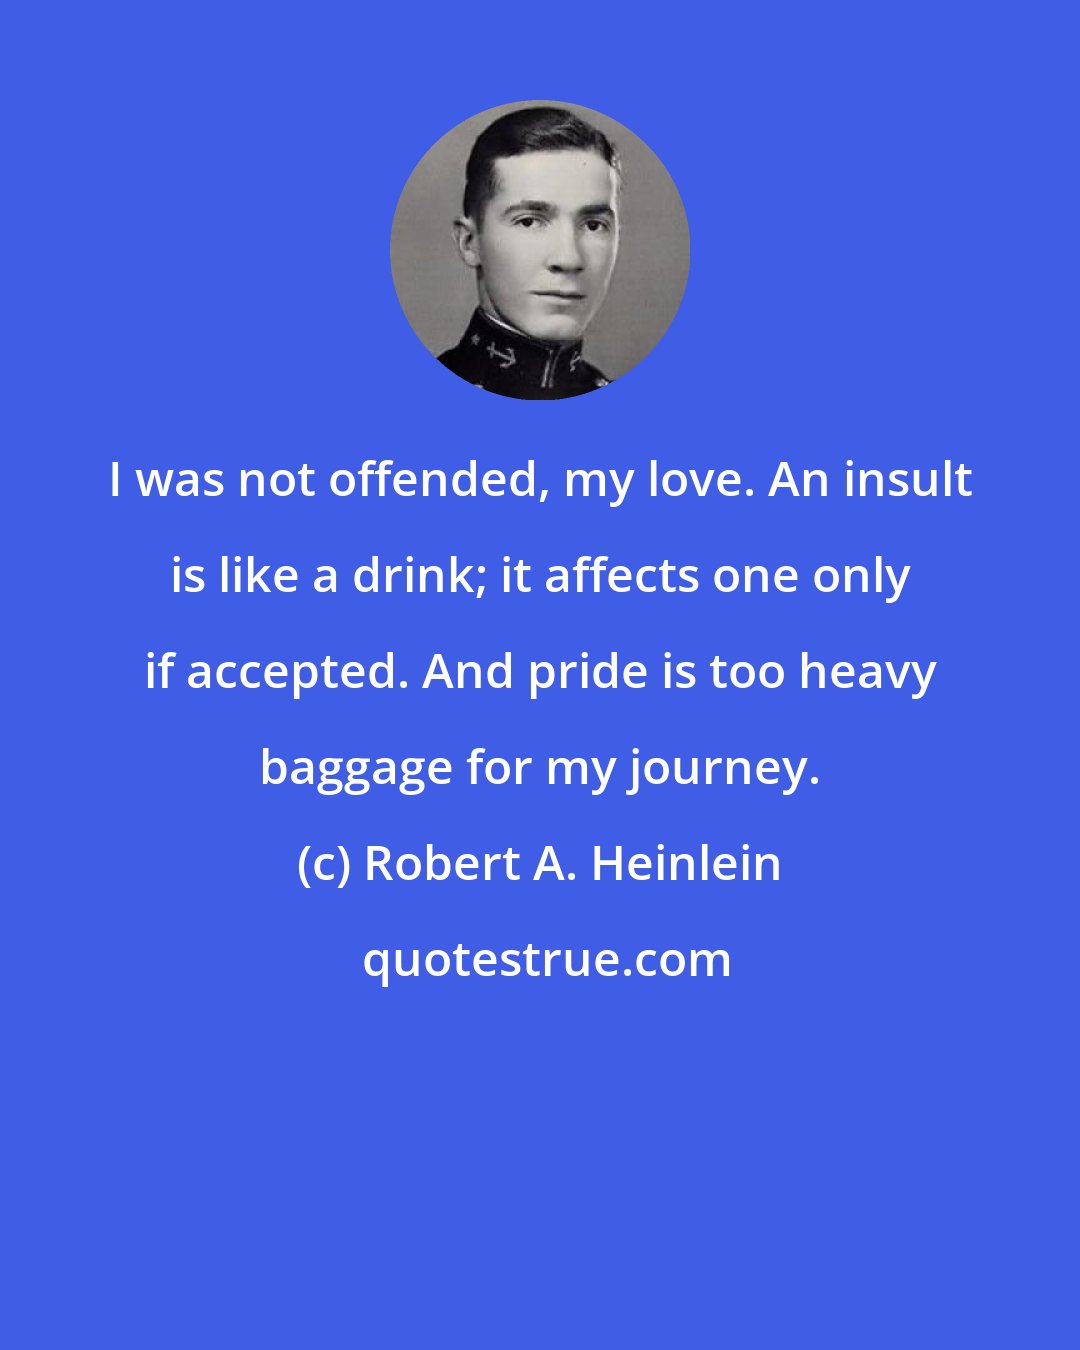 Robert A. Heinlein: I was not offended, my love. An insult is like a drink; it affects one only if accepted. And pride is too heavy baggage for my journey.